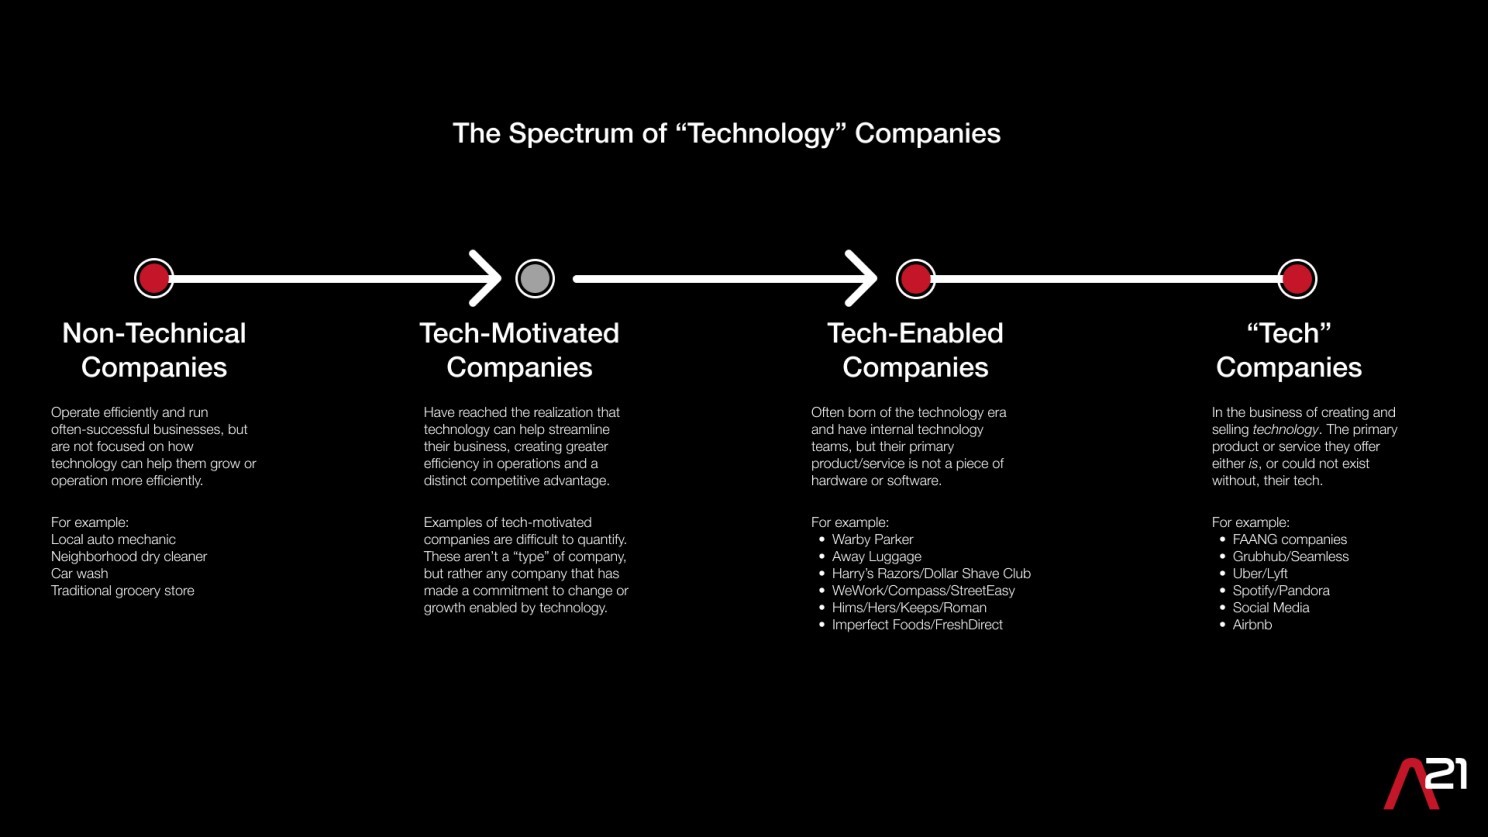 The spectrum of technology companies